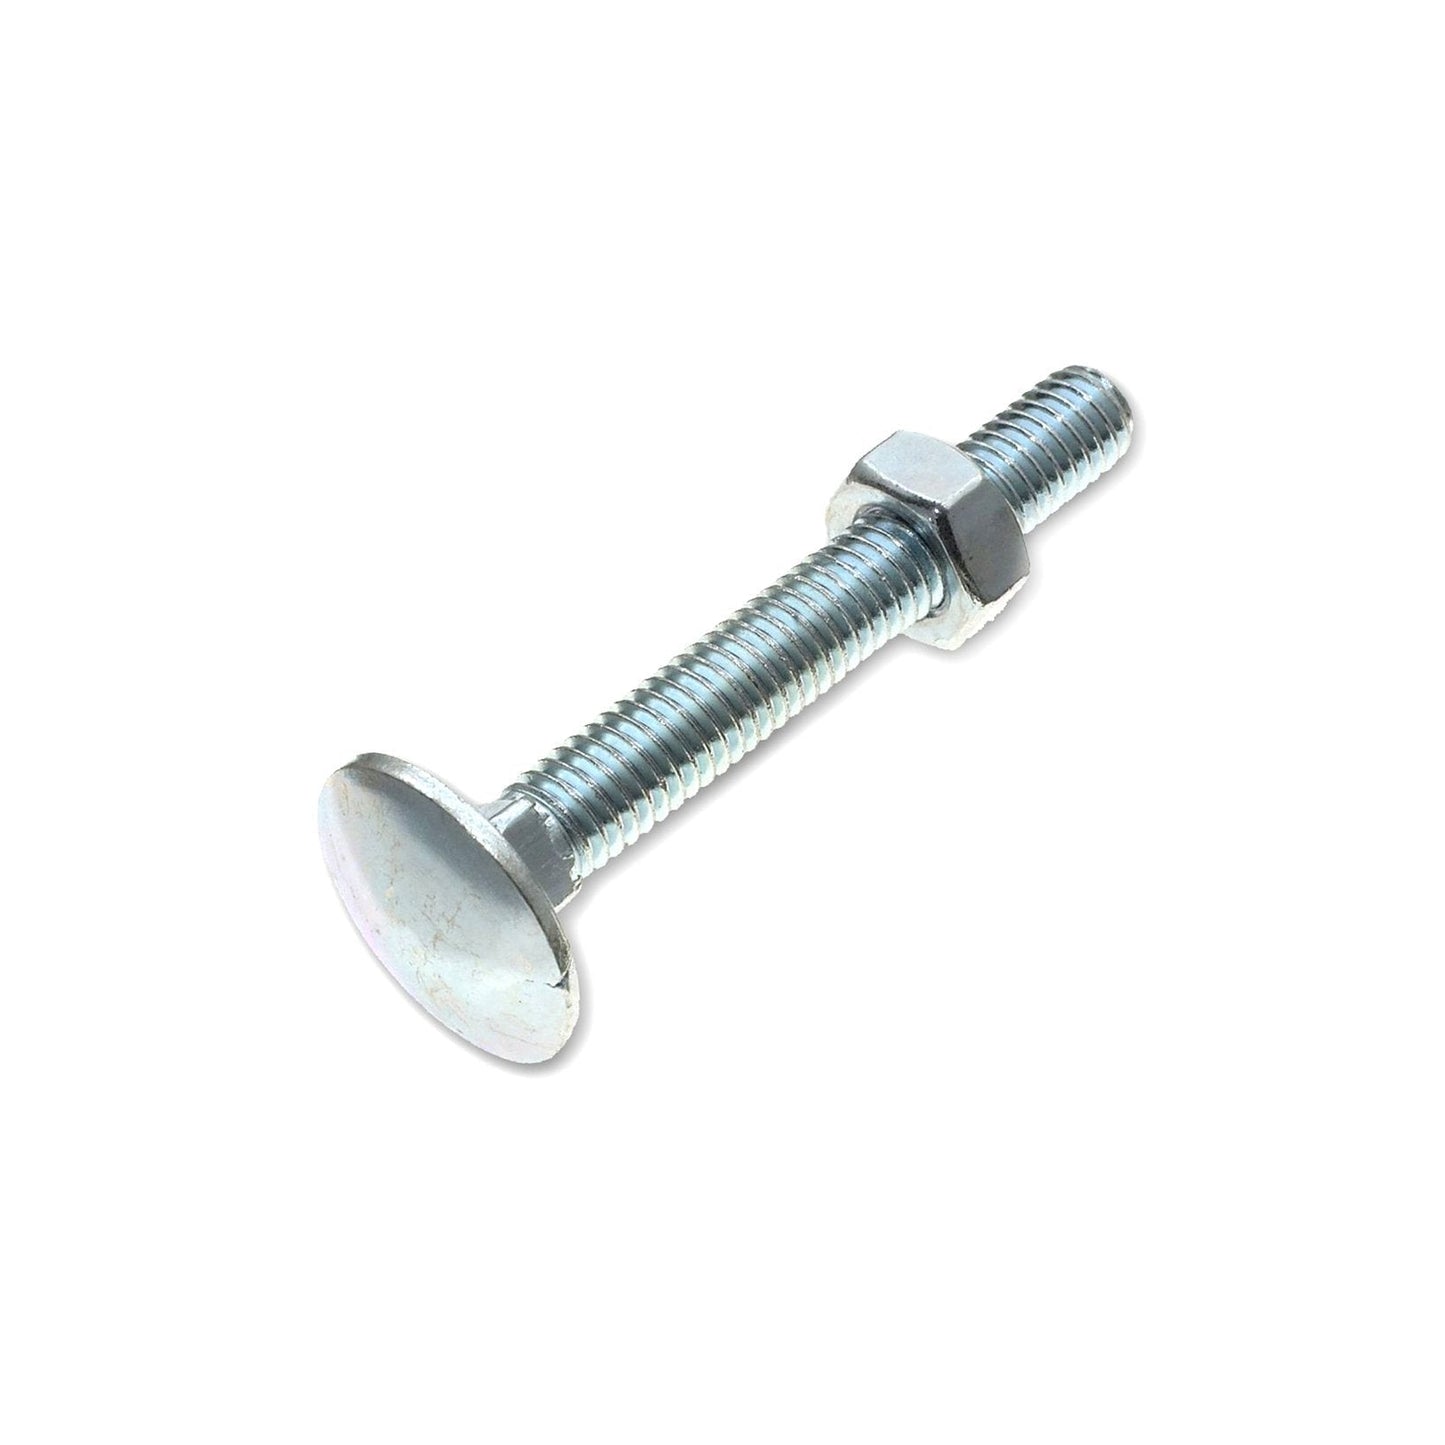 m8 x 50 Cup Square Bolts & Nuts Diy 0560 (Large Letter Rate)